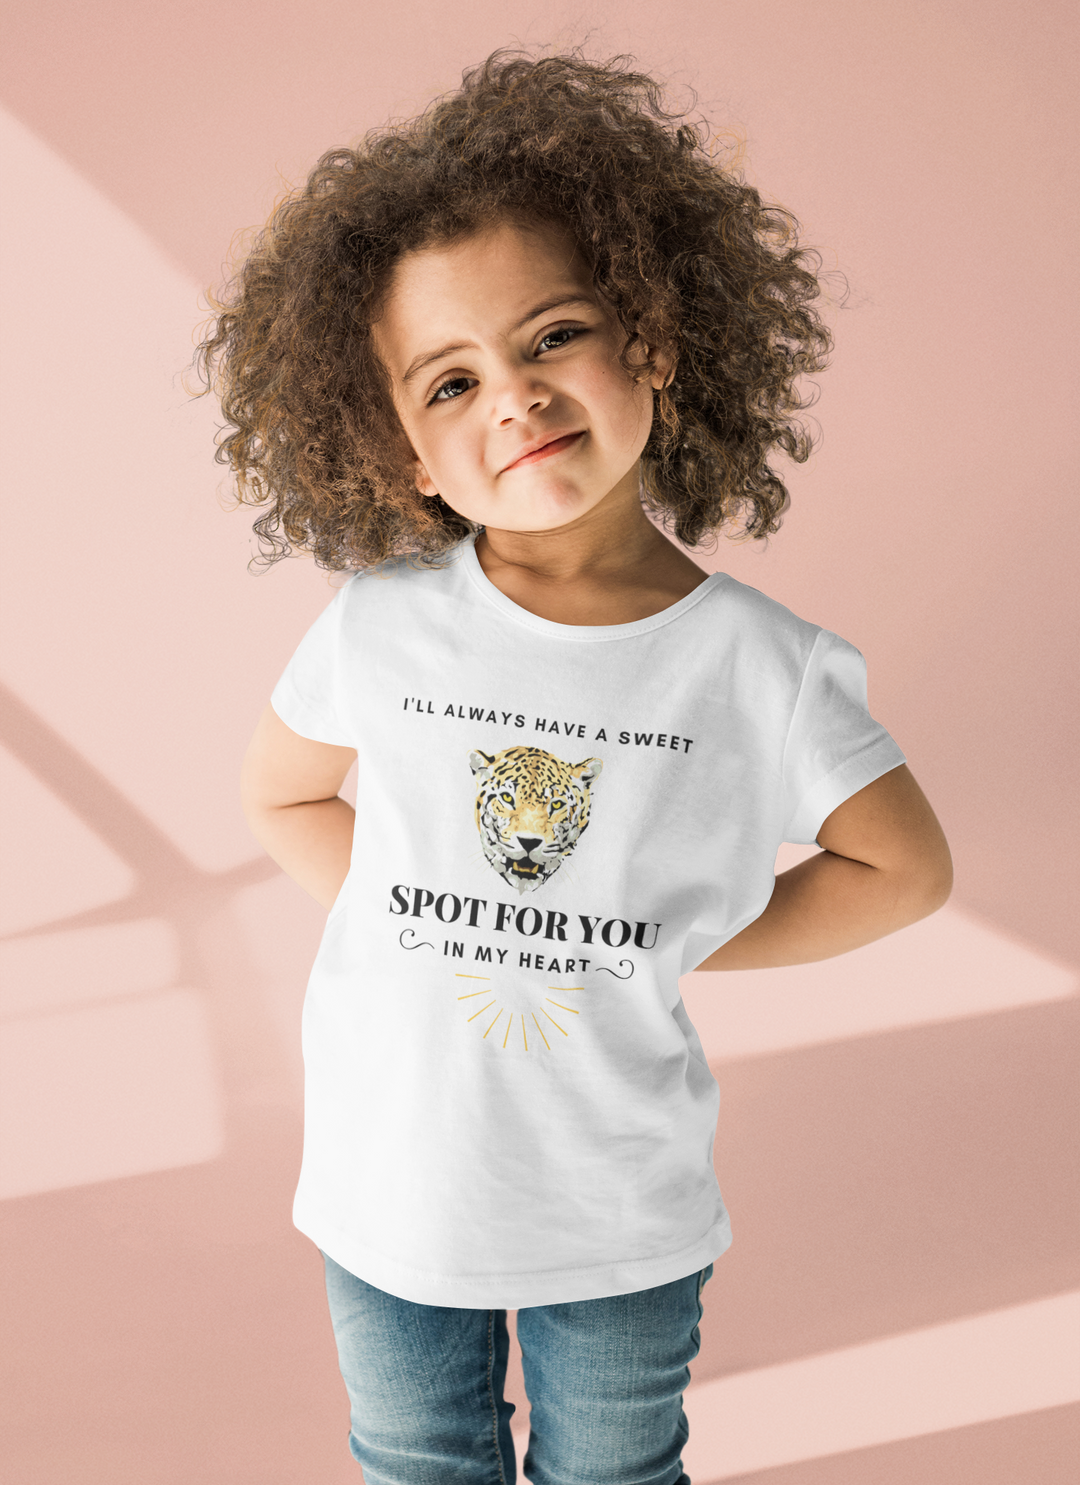 I'll always have a sweet spot for you in my heart. Short sleeve t shirt for toddler and kids. - TeesForToddlersandKids -  t-shirt - holidays, Love - valentines-t-shirt-ill-always-have-a-sweet-spot-for-you-in-my-heart